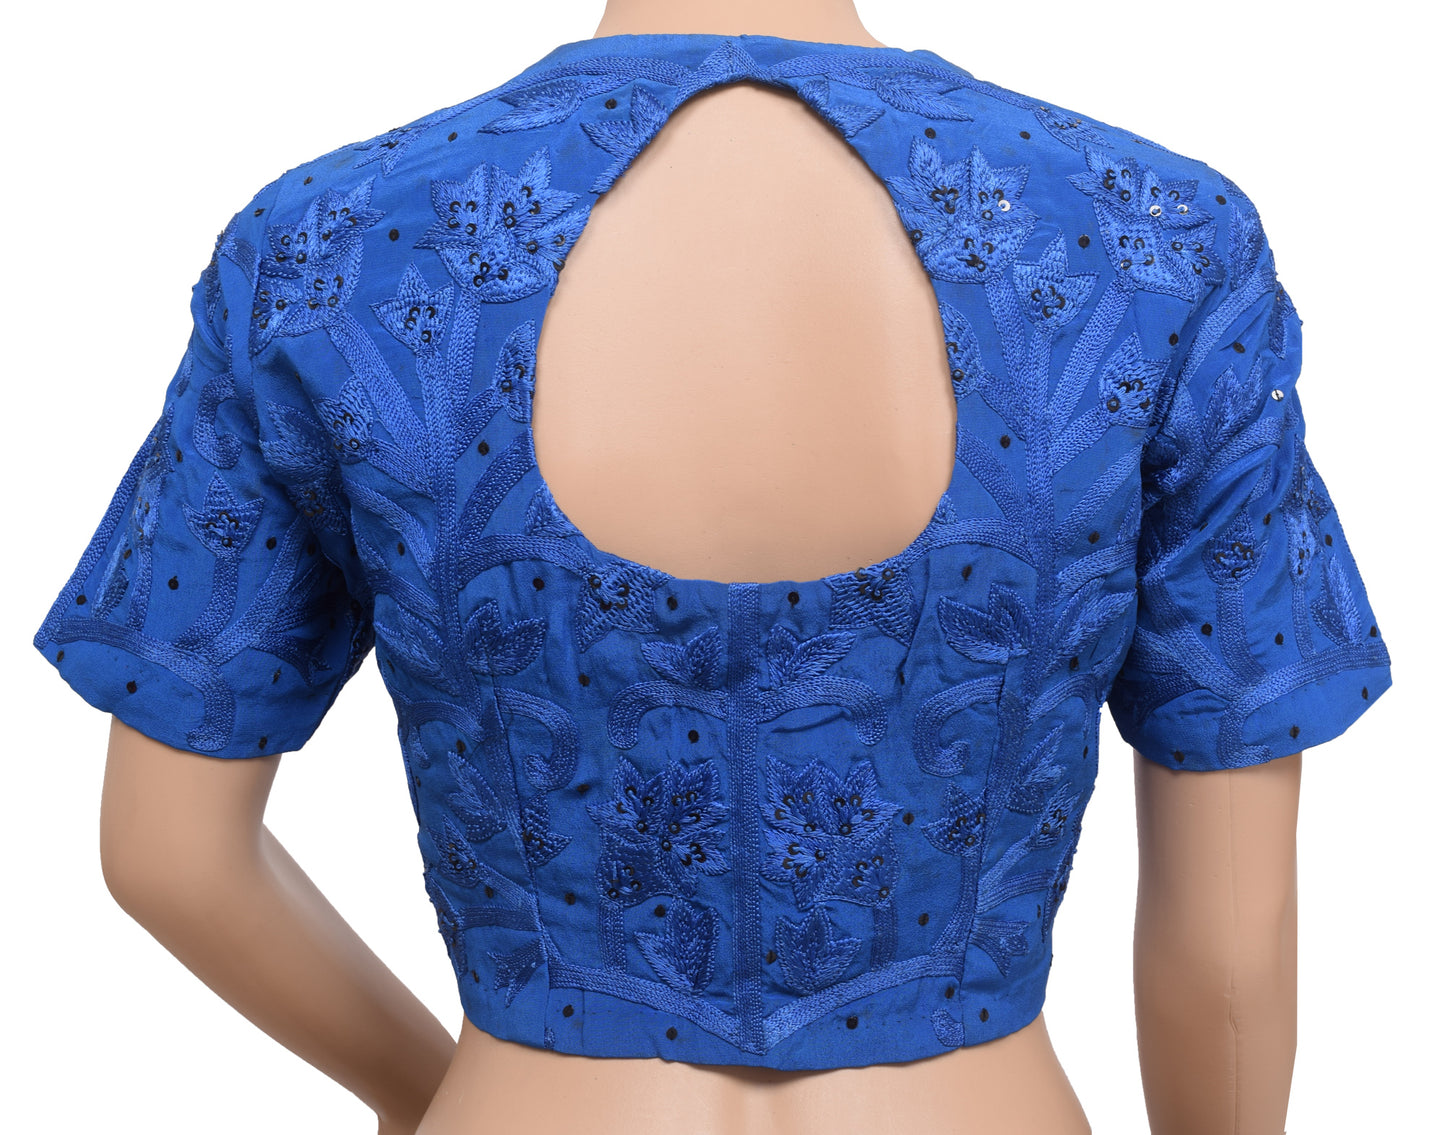 Sushila Vintage Readymade Stitched Sari Blouse Pure Crepe Blue Embroidered Top